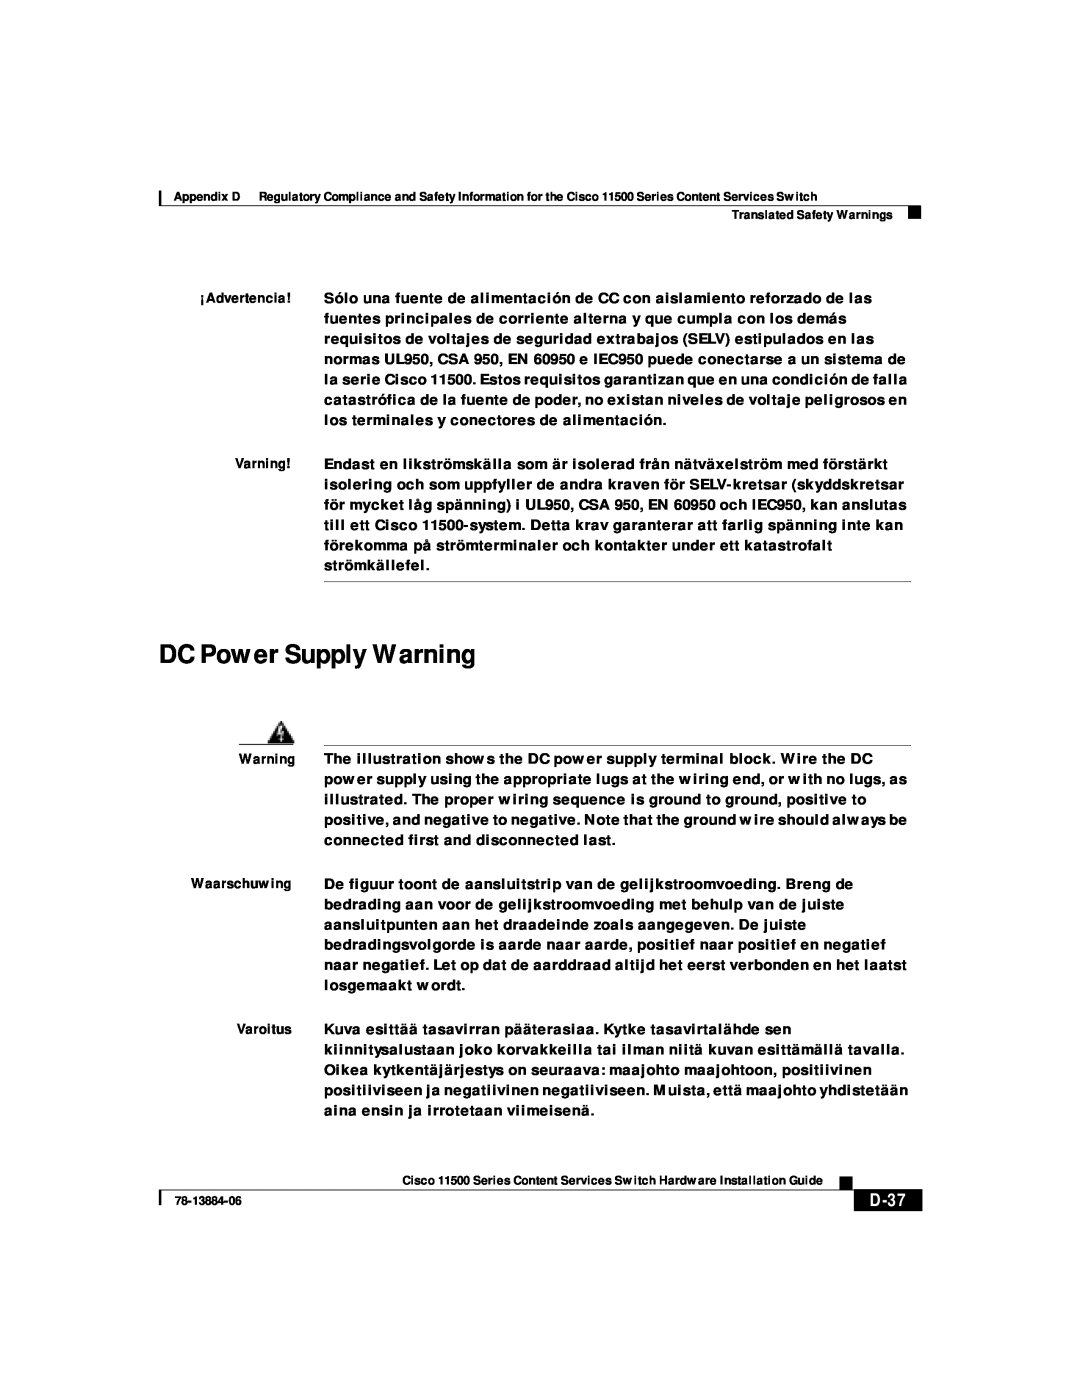 Cisco Systems 11500 Series manual DC Power Supply Warning, D-37 